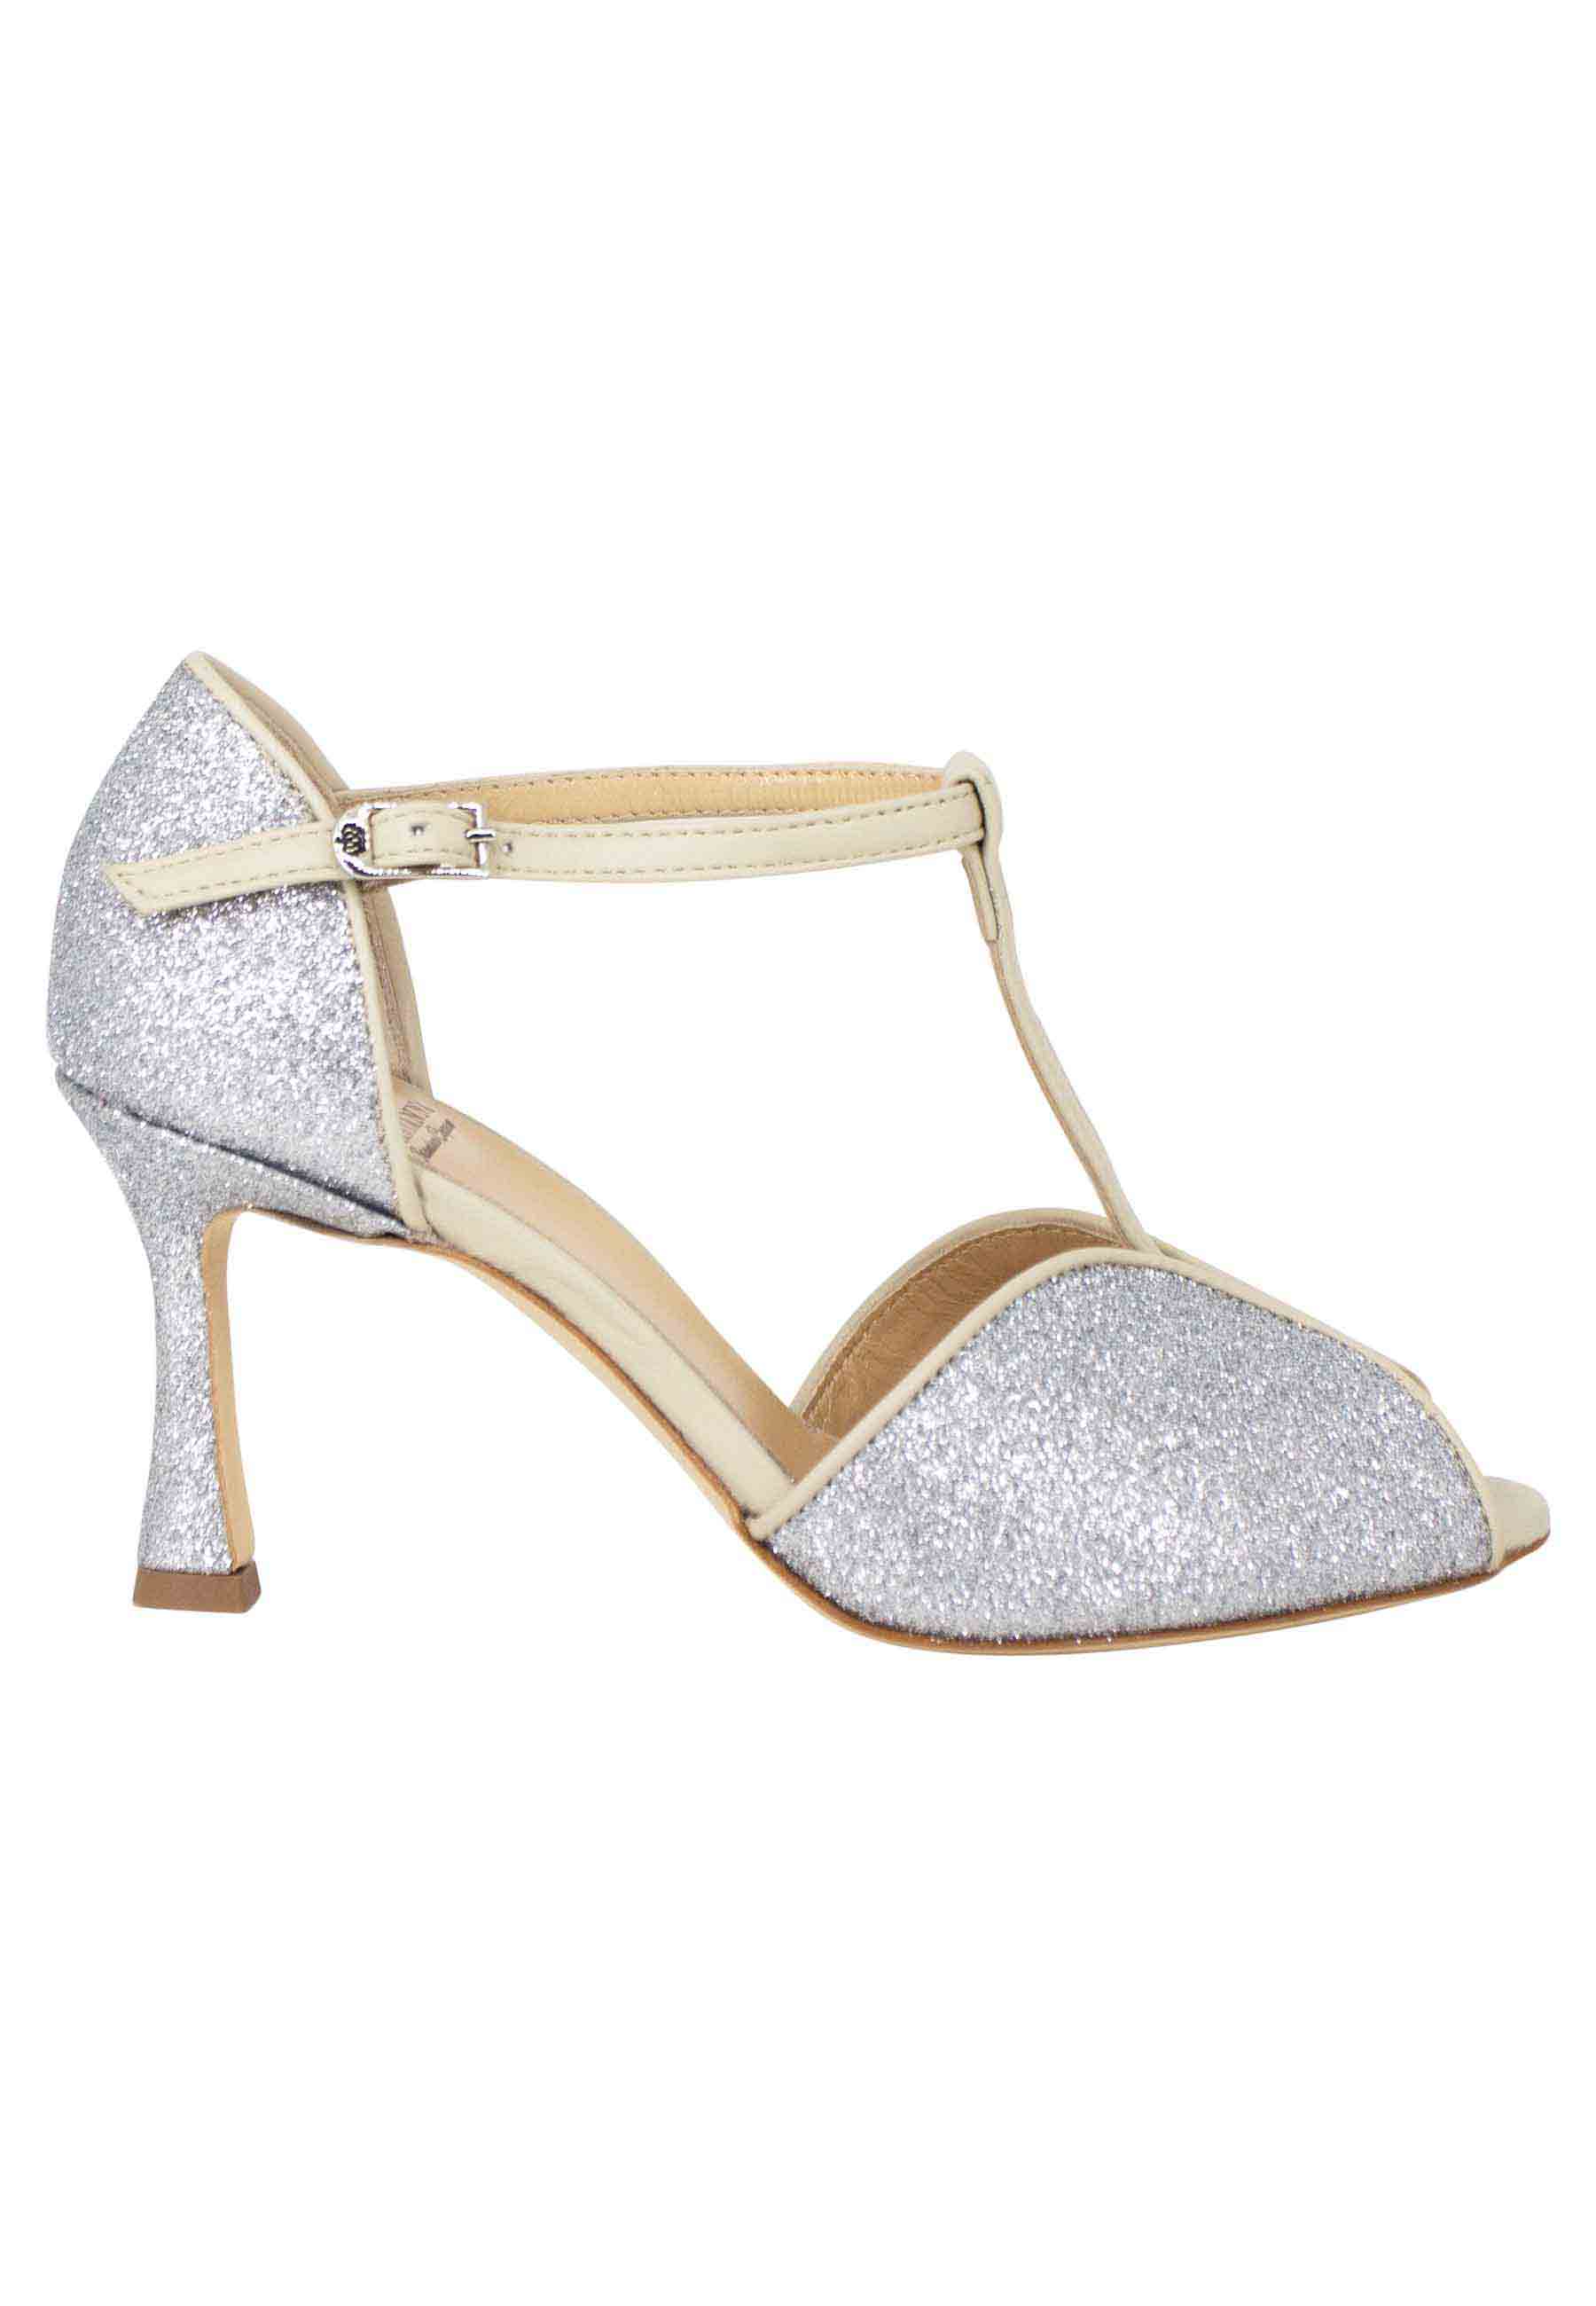 Women's silver glitter and leather sandals with high heel